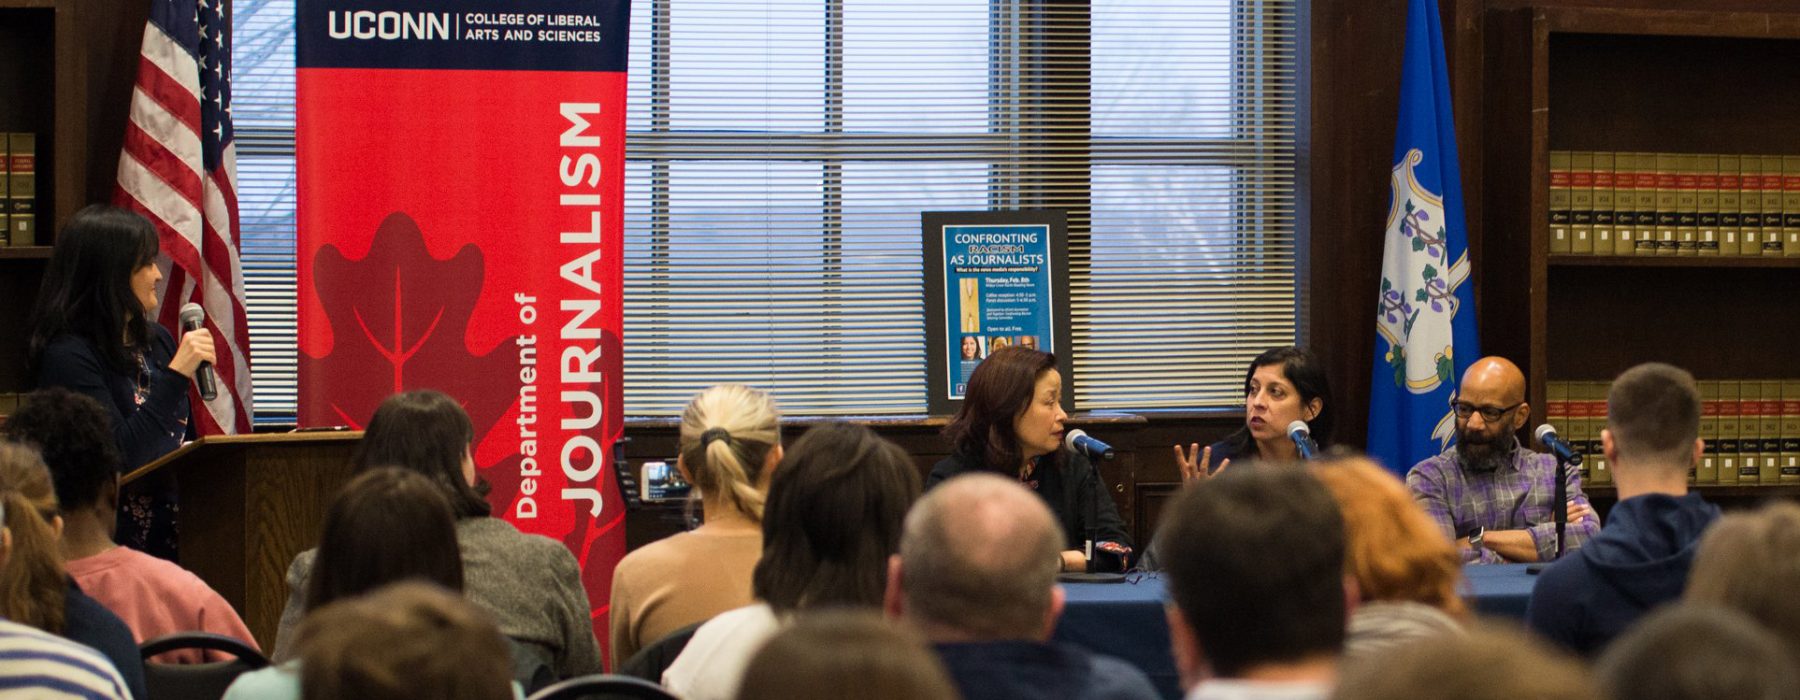 'Confronting Racism as Journalists' event with columnists Kevin Blackistone, Helen Ubinas and Frances Kai-Hwa Wang